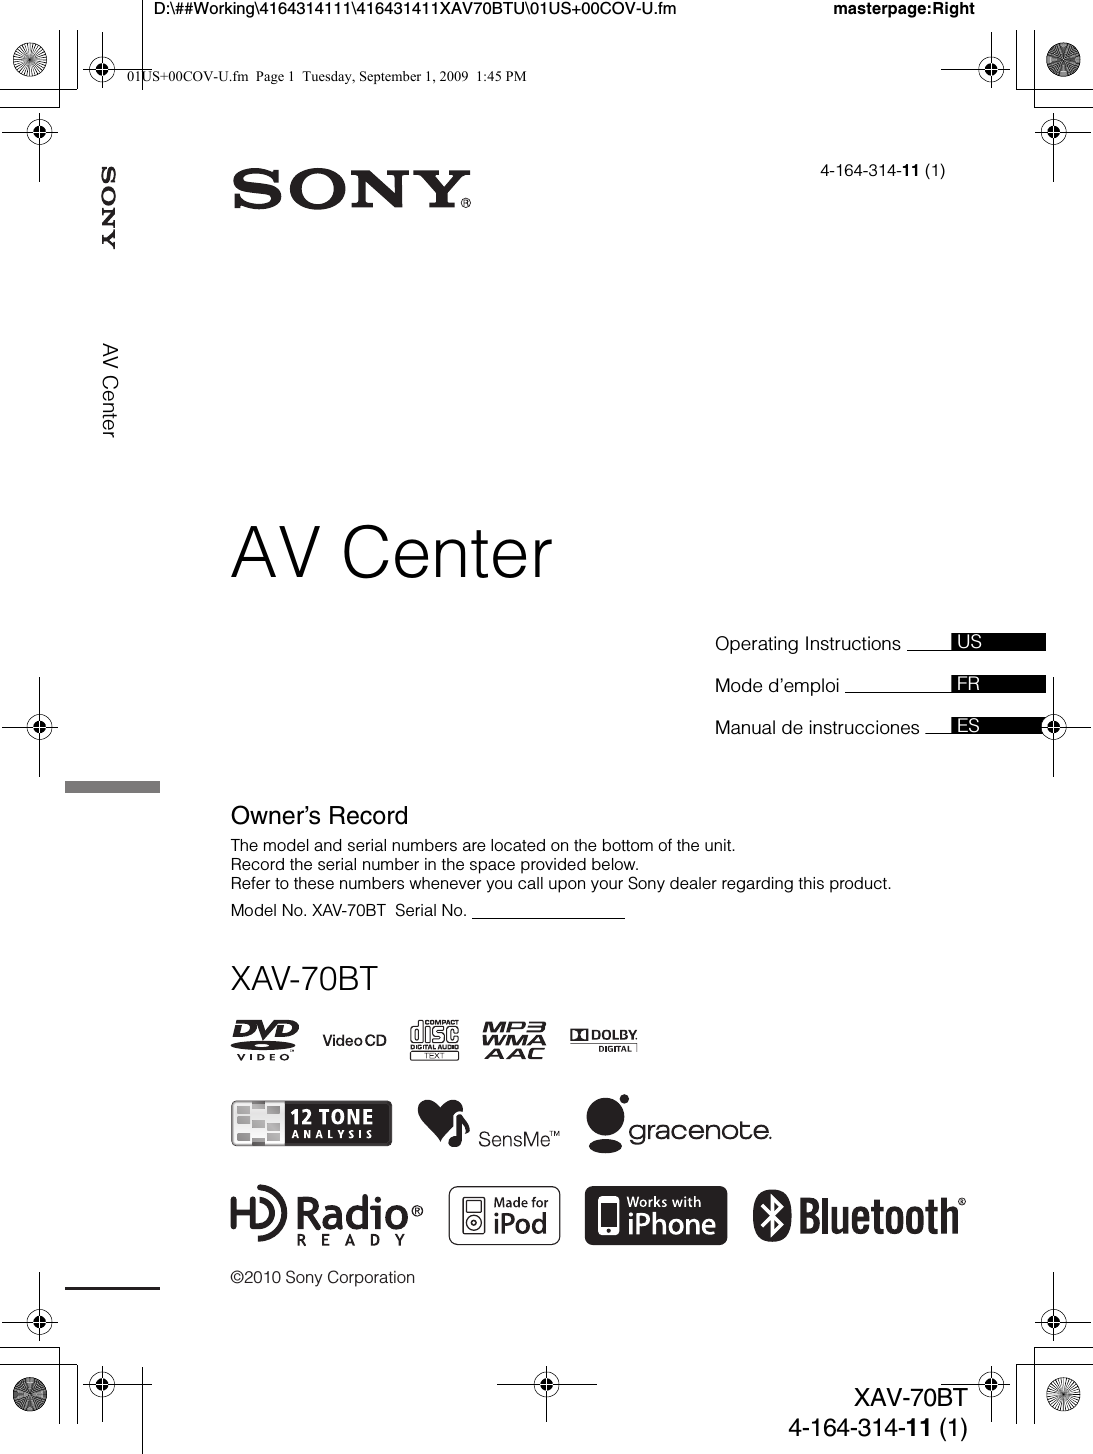 ©2010 Sony Corporationmasterpage:RightD:\##Working\4164314111\416431411XAV70BTU\01US+00COV-U.fmXAV-70BT4-164-314-11 (1)AV CenterOperating Instructions Mode d’emploi Manual de instrucciones 4-164-314-11 (1)XAV-70BTUSFRESOwner’s RecordThe model and serial numbers are located on the bottom of the unit.Record the serial number in the space provided below.Refer to these numbers whenever you call upon your Sony dealer regarding this product.Model No. XAV-70BT  Serial No.                                  AV Center01US+00COV-U.fm  Page 1  Tuesday, September 1, 2009  1:45 PM